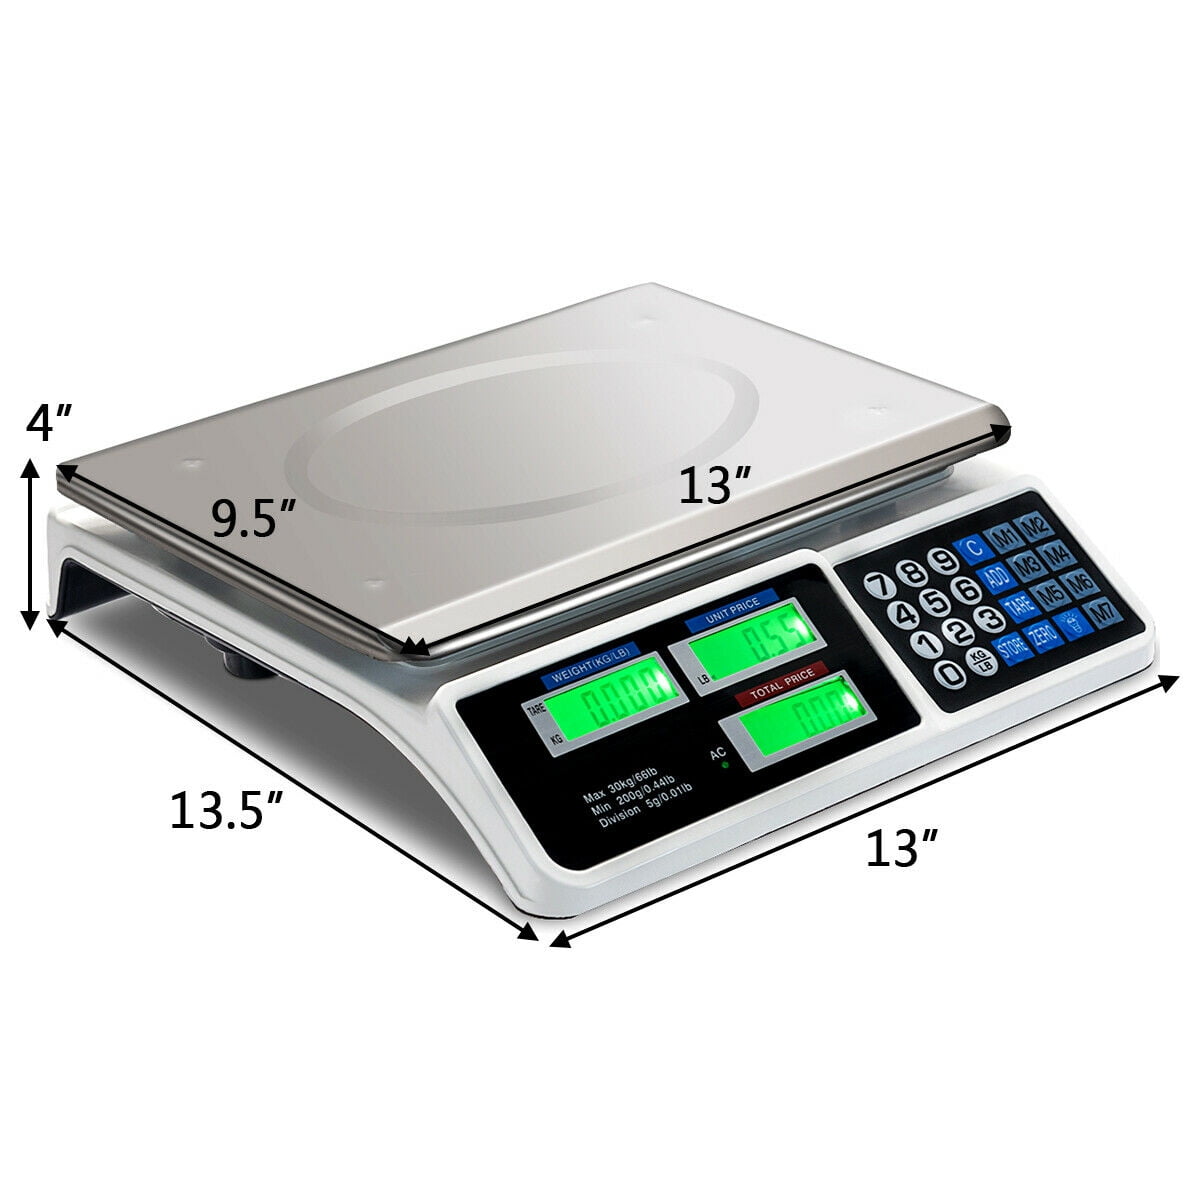 This modern digital food scale is only $7 on  today